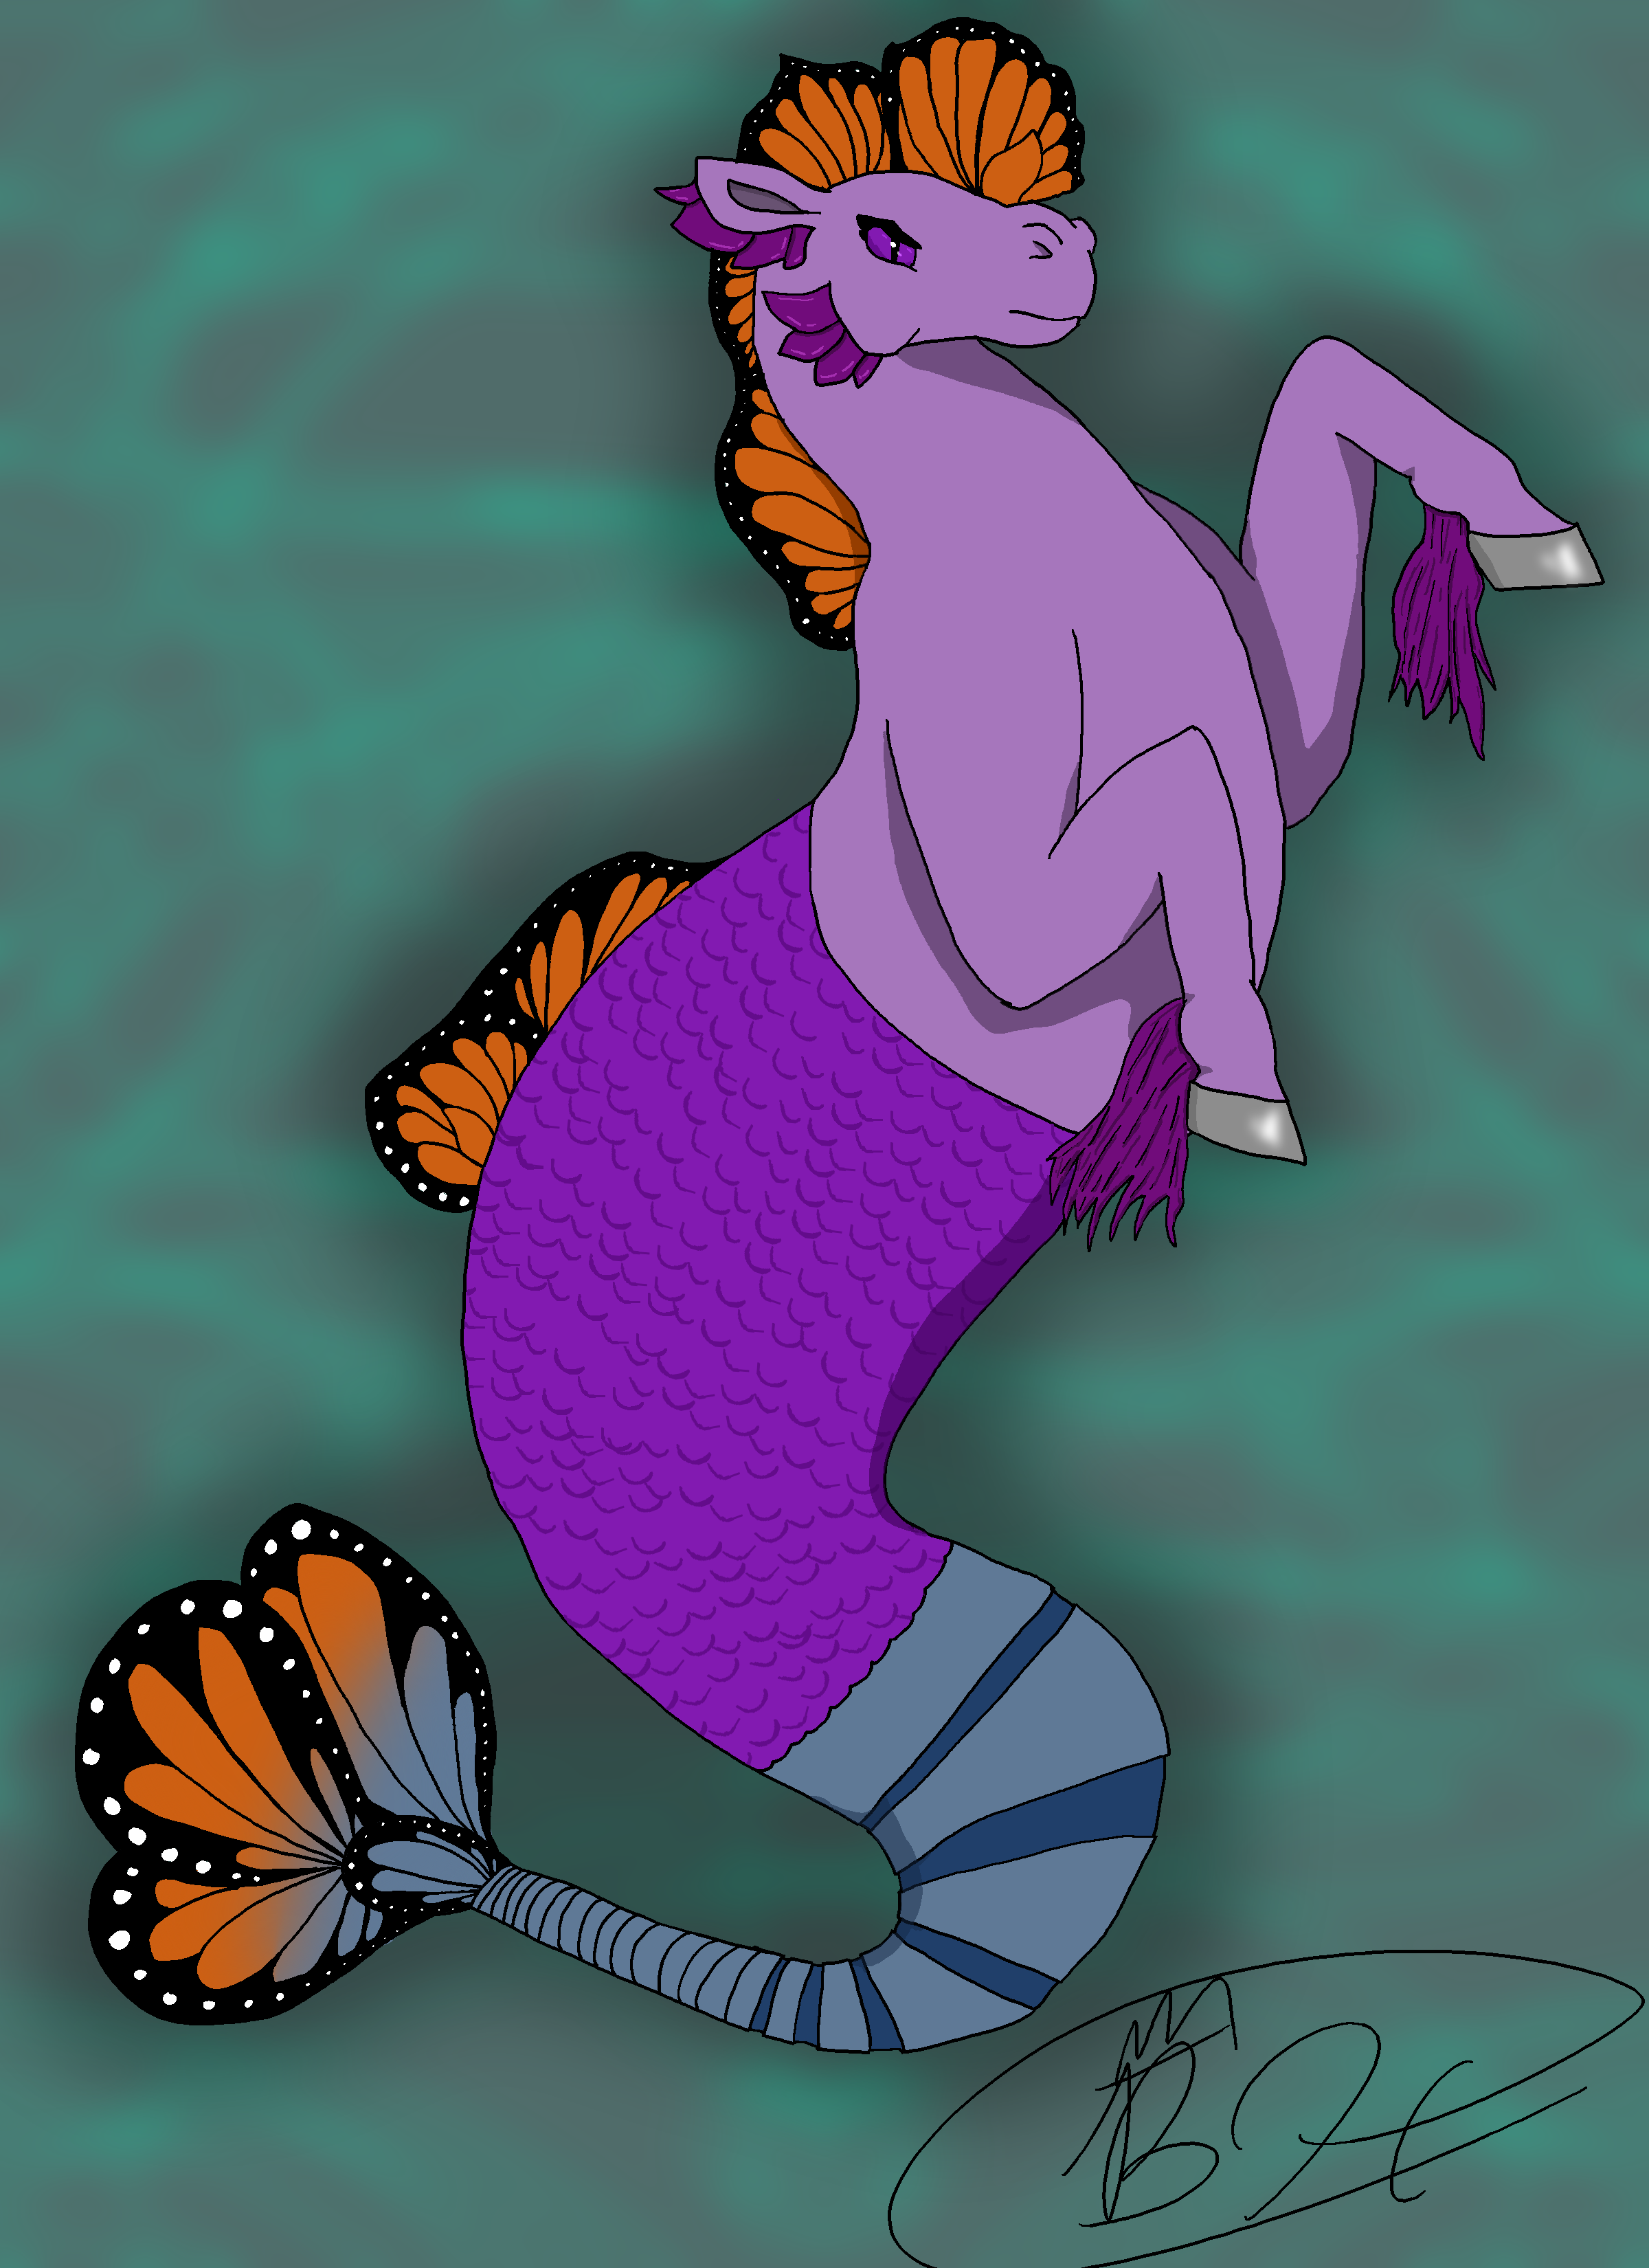 Purple Hippocampus with Monarch Butterfly accents